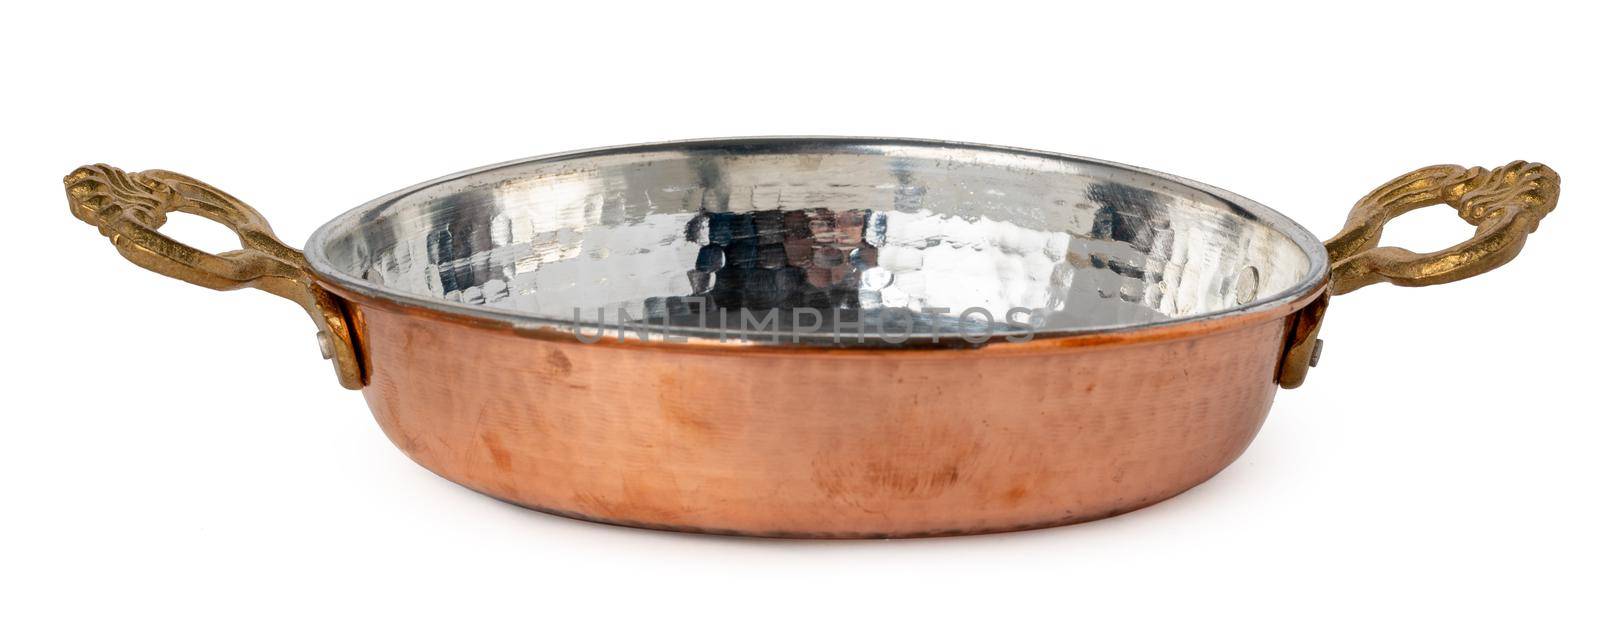 Copper cooking pan isolated on white background close up